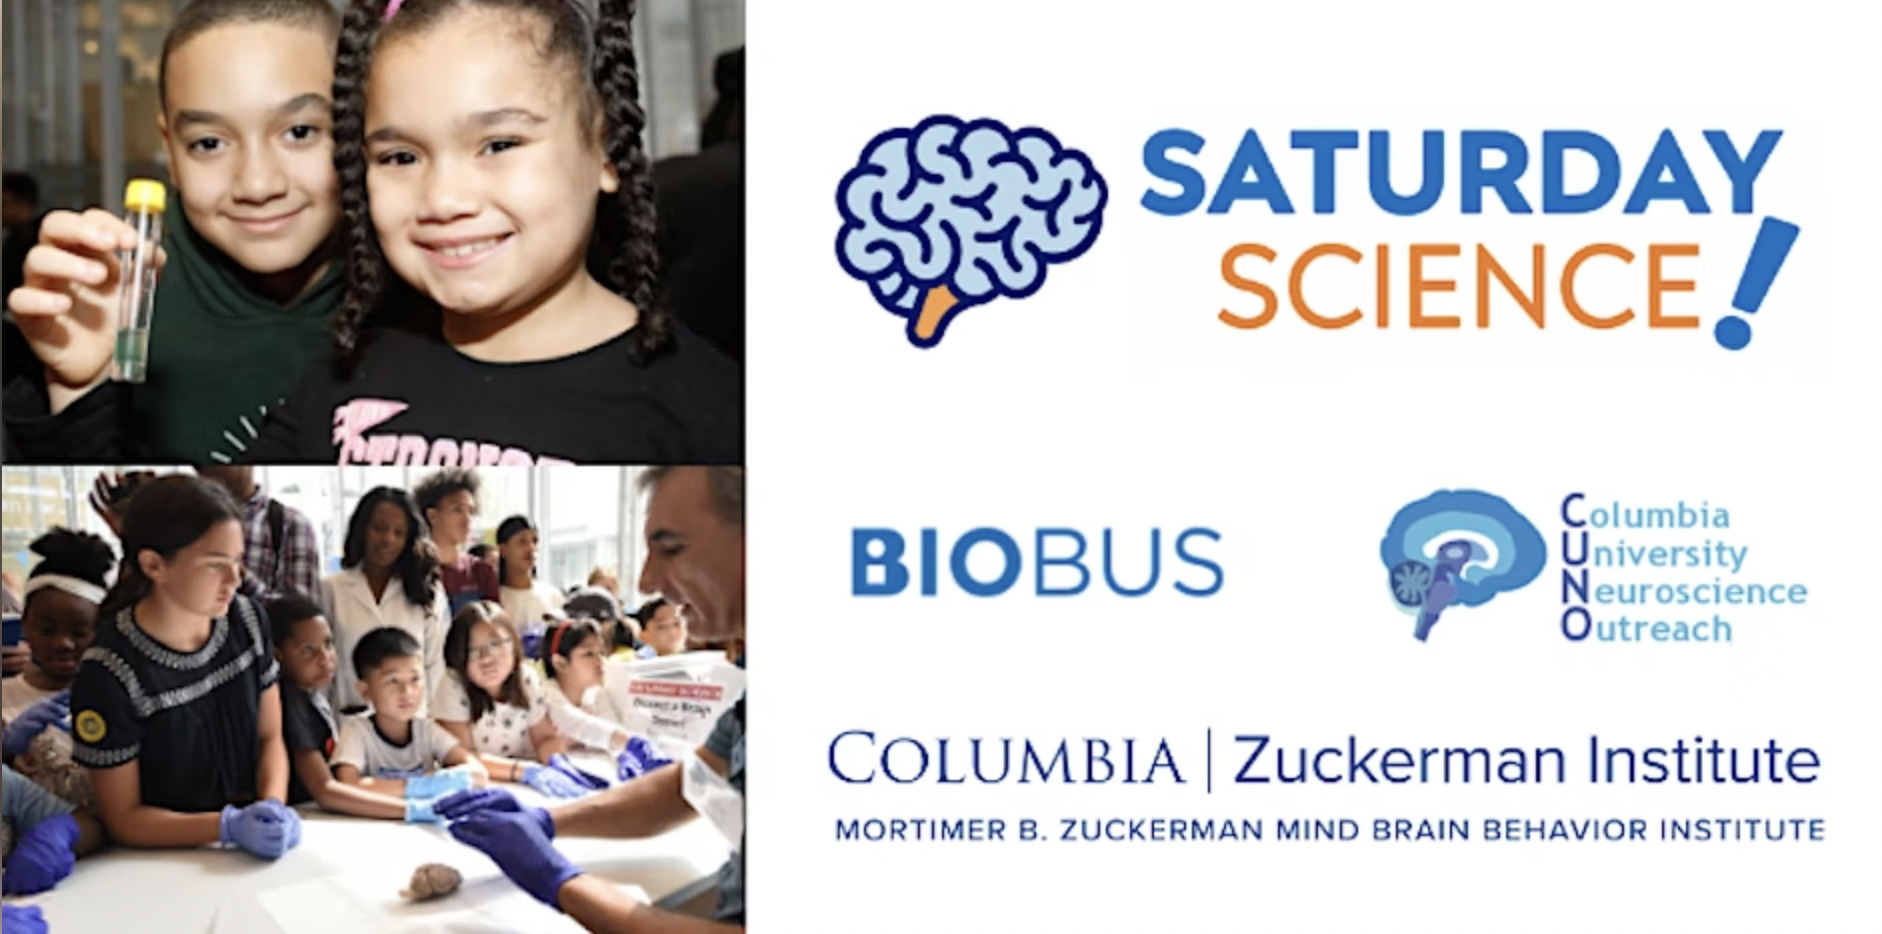 Saturday Science at Columbia’s Zuckerman Institute - Manhattanville Community Day: Growing Together  ​​​​​